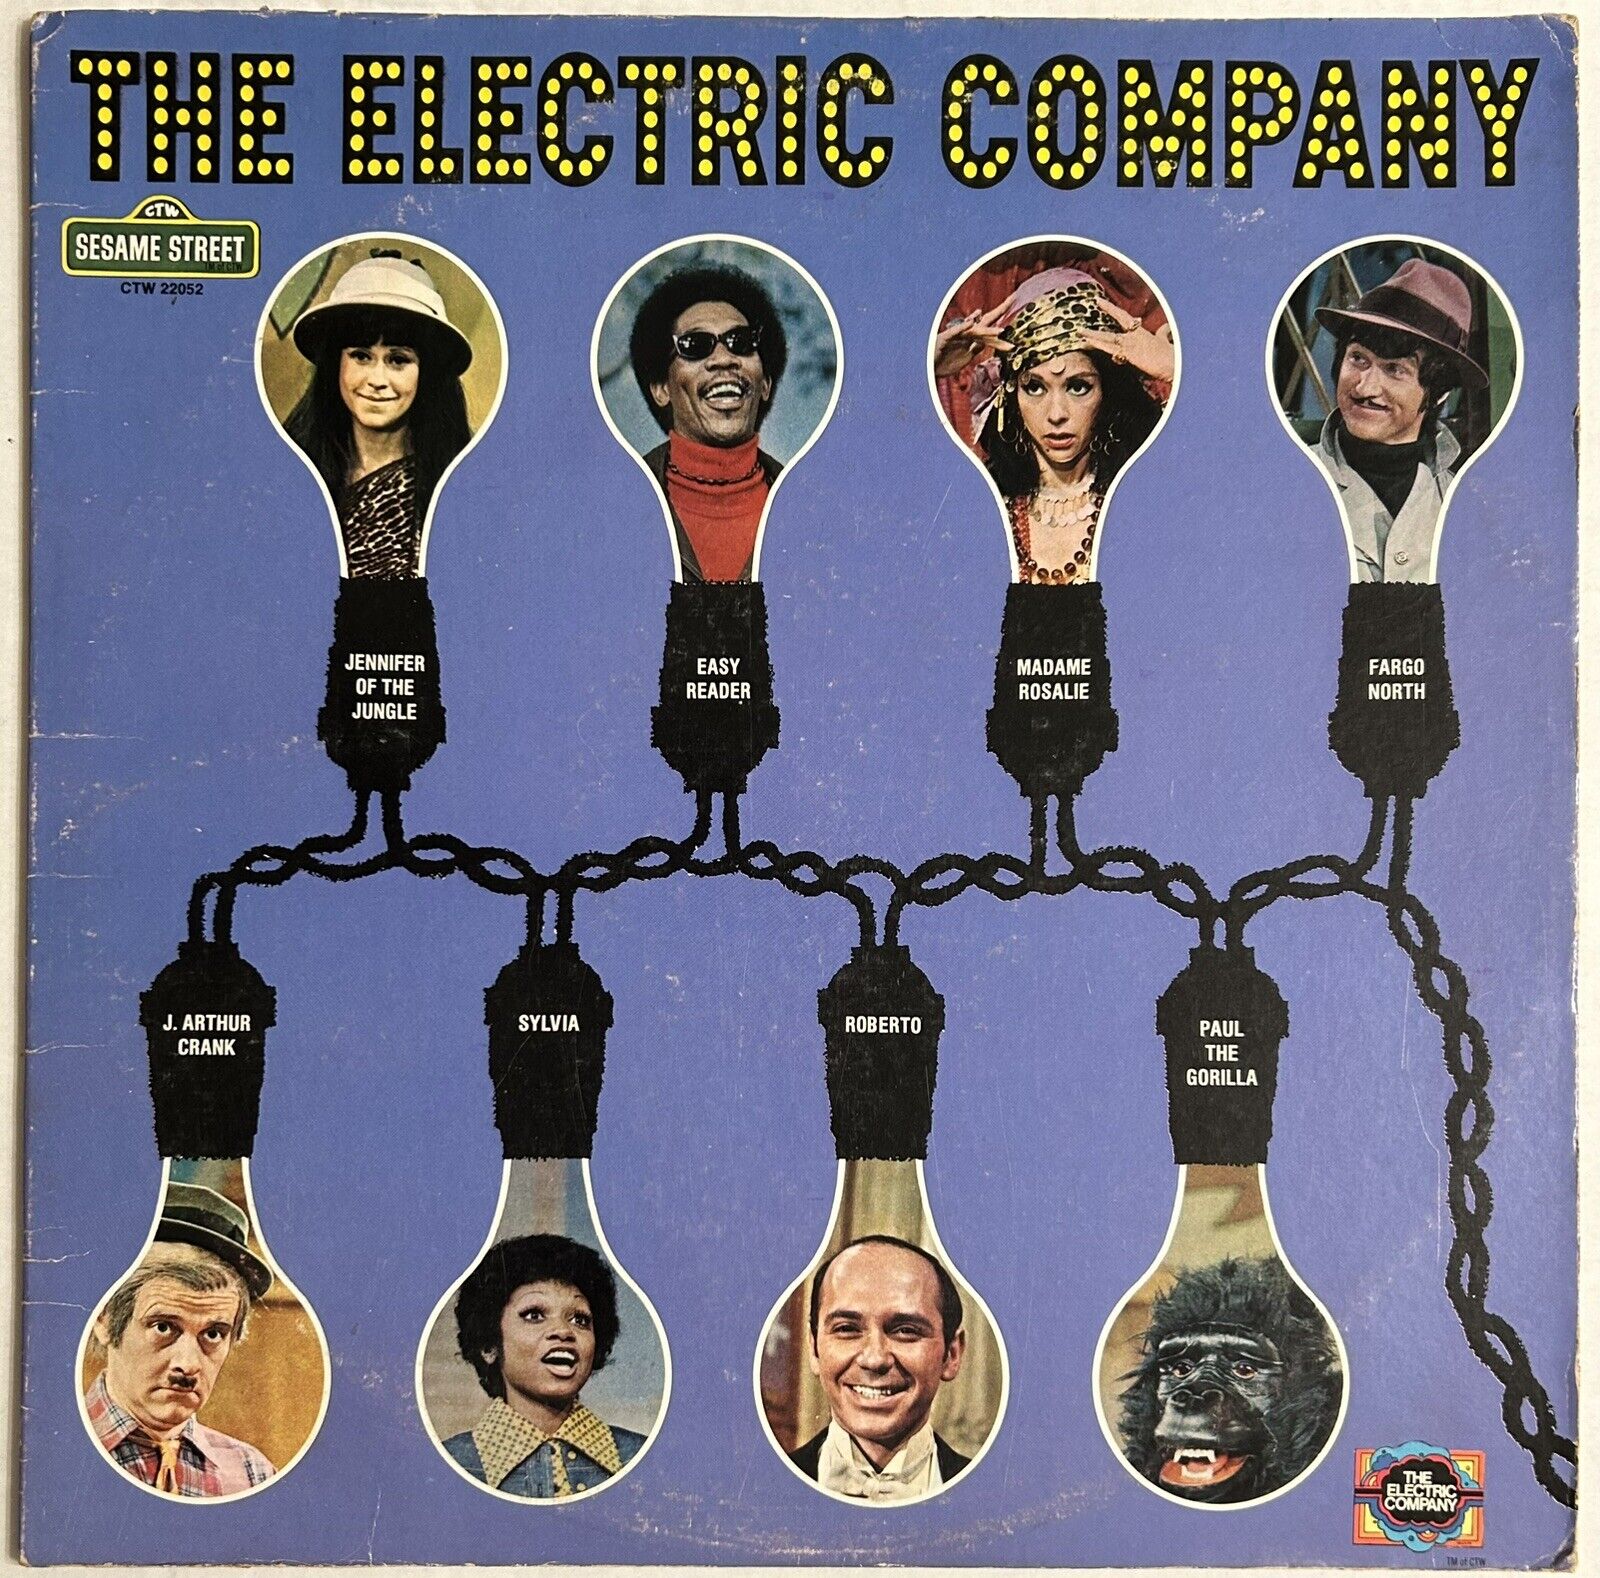 The Electric Company - Vinyl LP - Sesame Street Records 1974 CTW 22052 Cleaned